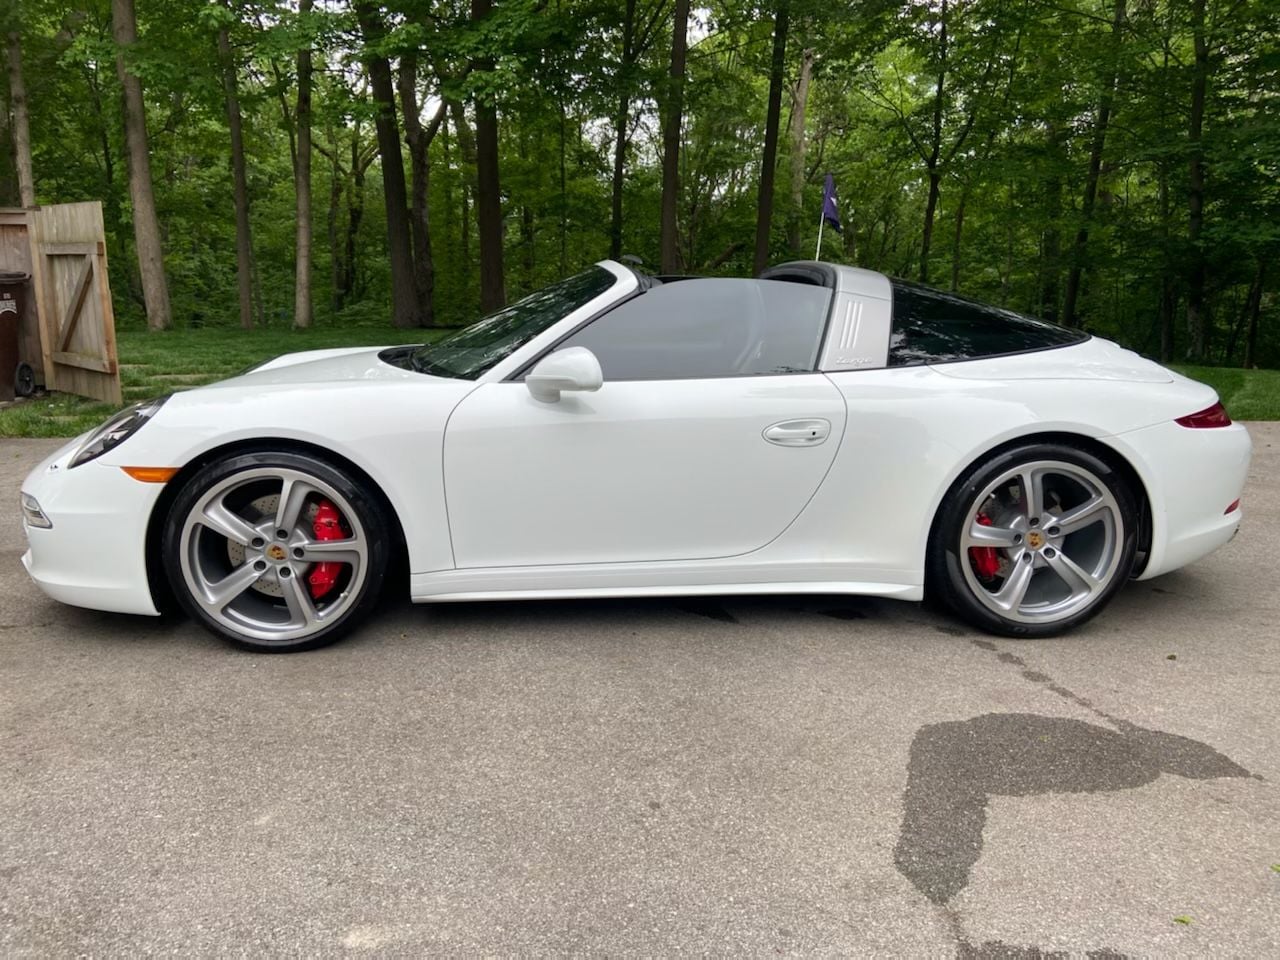 2016 Porsche 911 - 2016 Porsche Targa - Used - VIN WP0BB2A94GS136416 - 8,800 Miles - Other - AWD - Automatic - Convertible - White - Indianapolis, IN 46260, United States